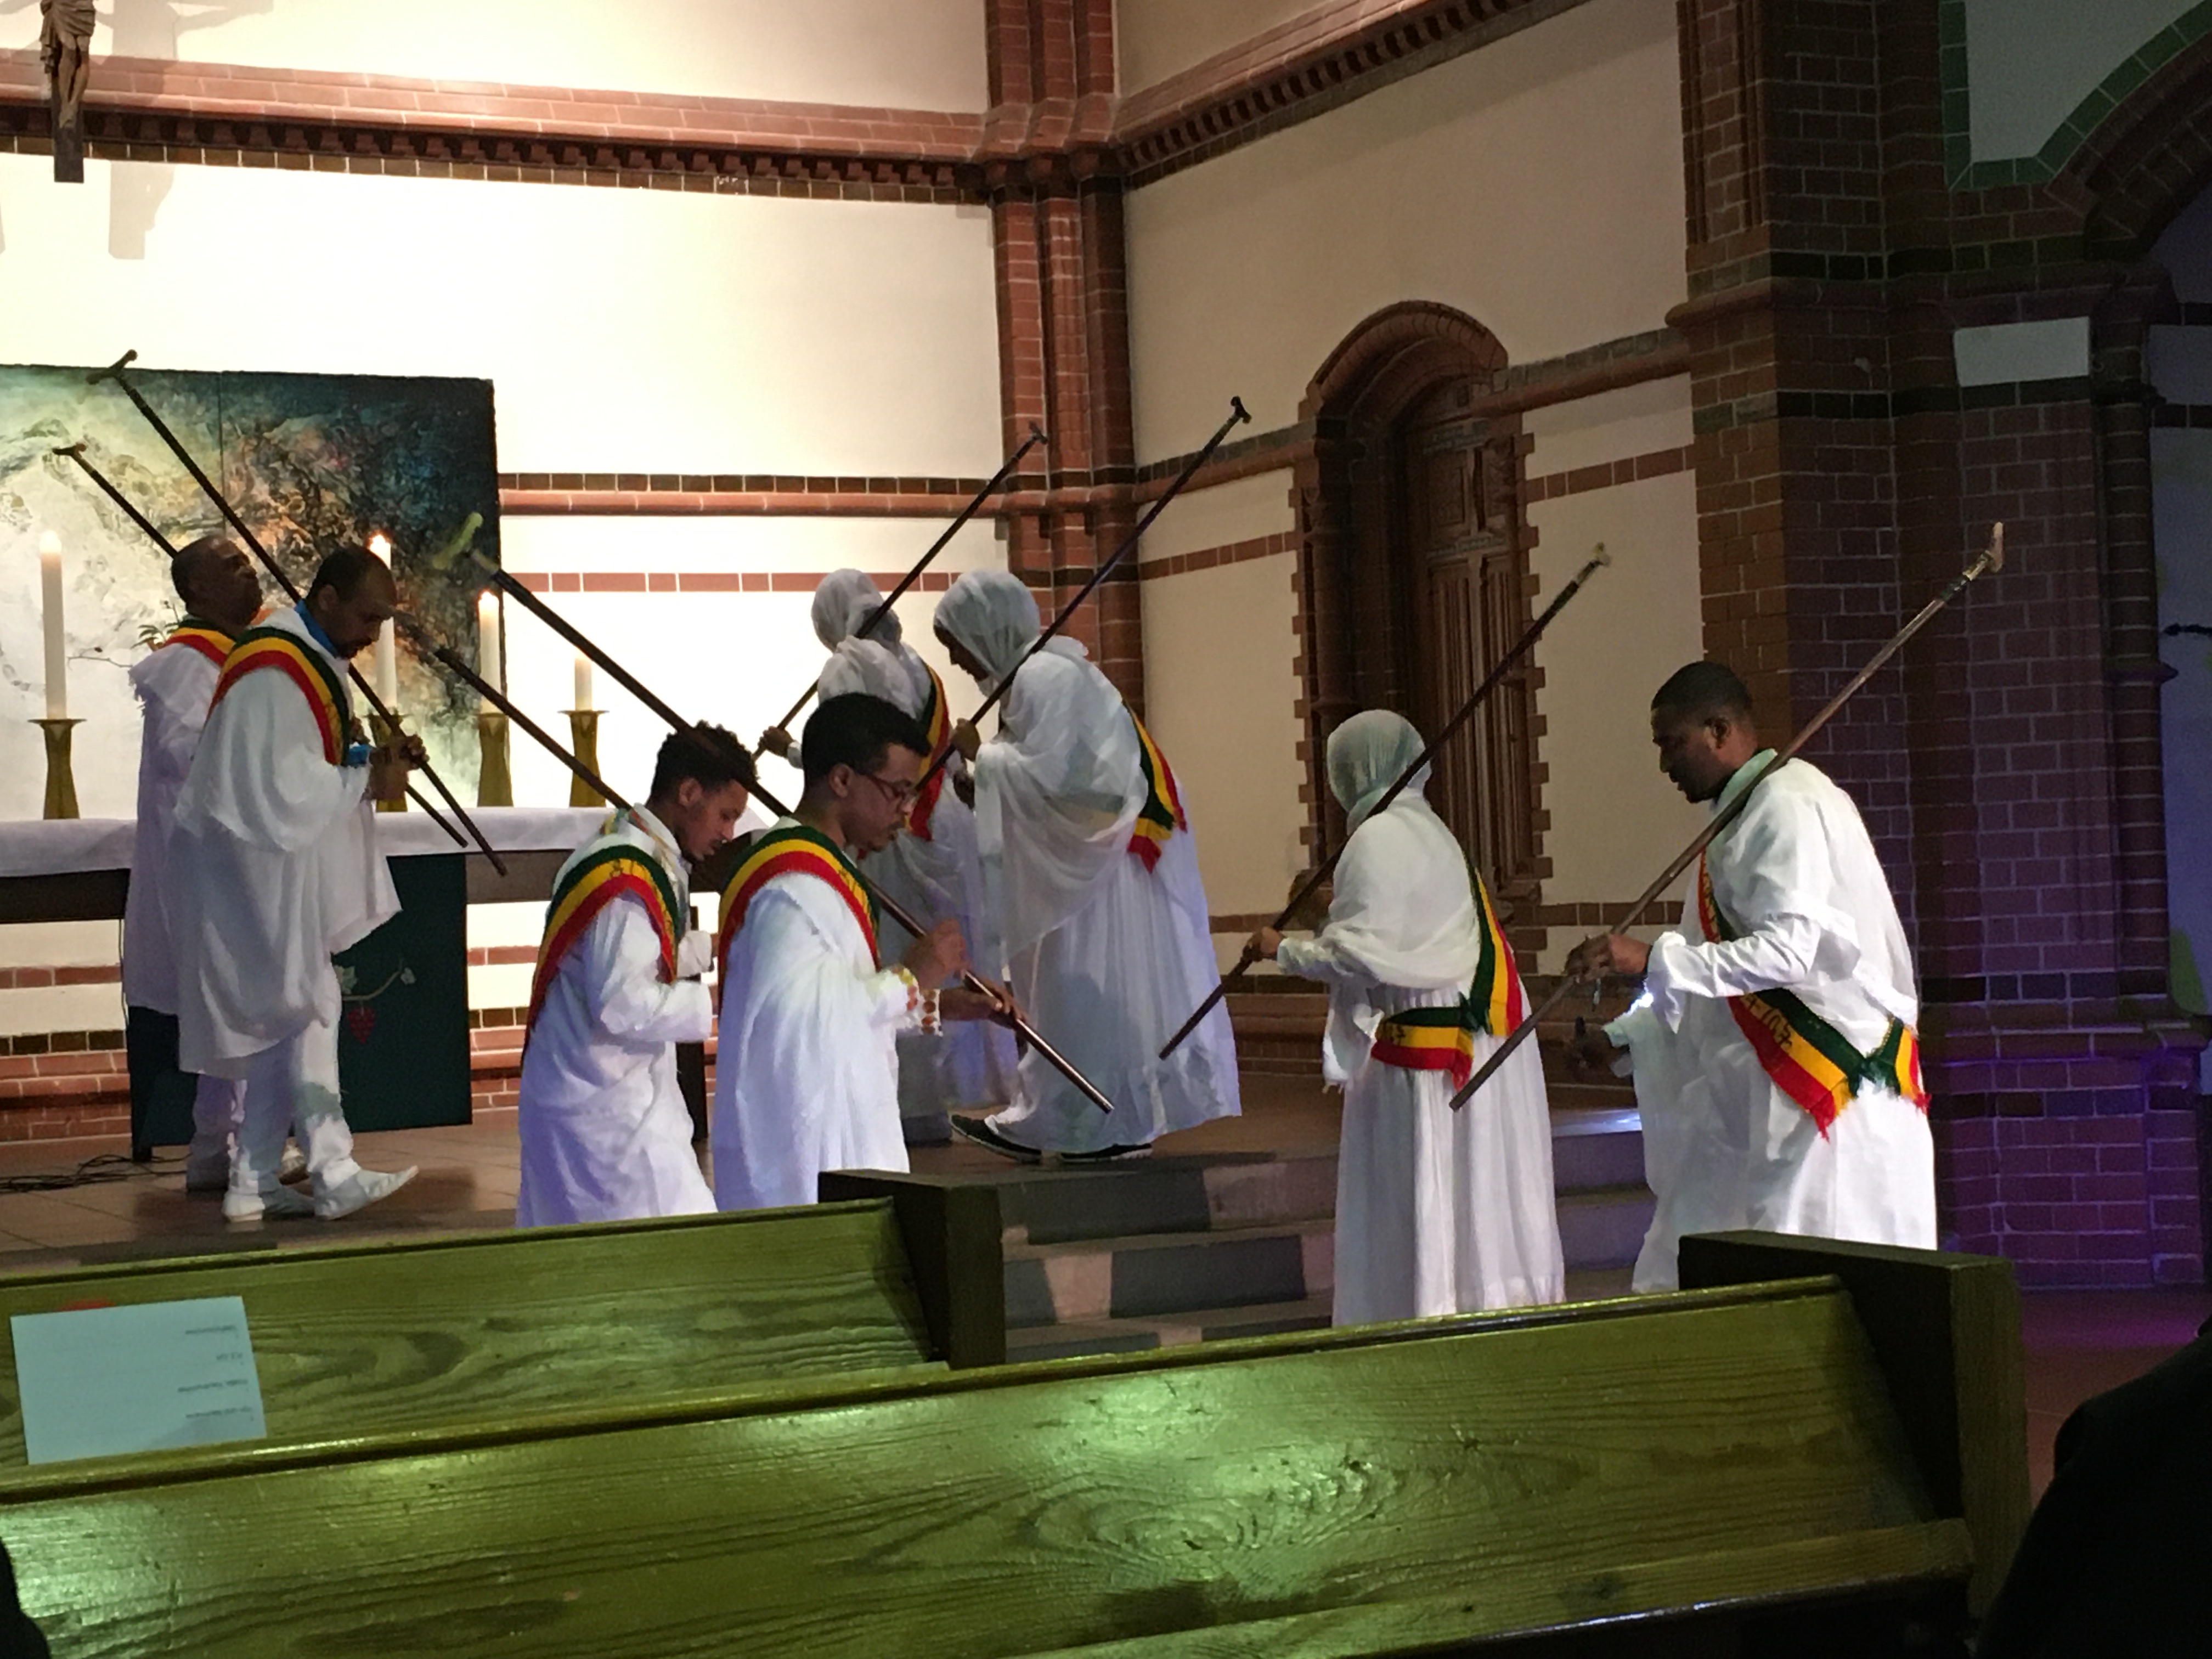 Deliberate movements, chanting and singing characterize the Ethiopian Orthodox choir performance.